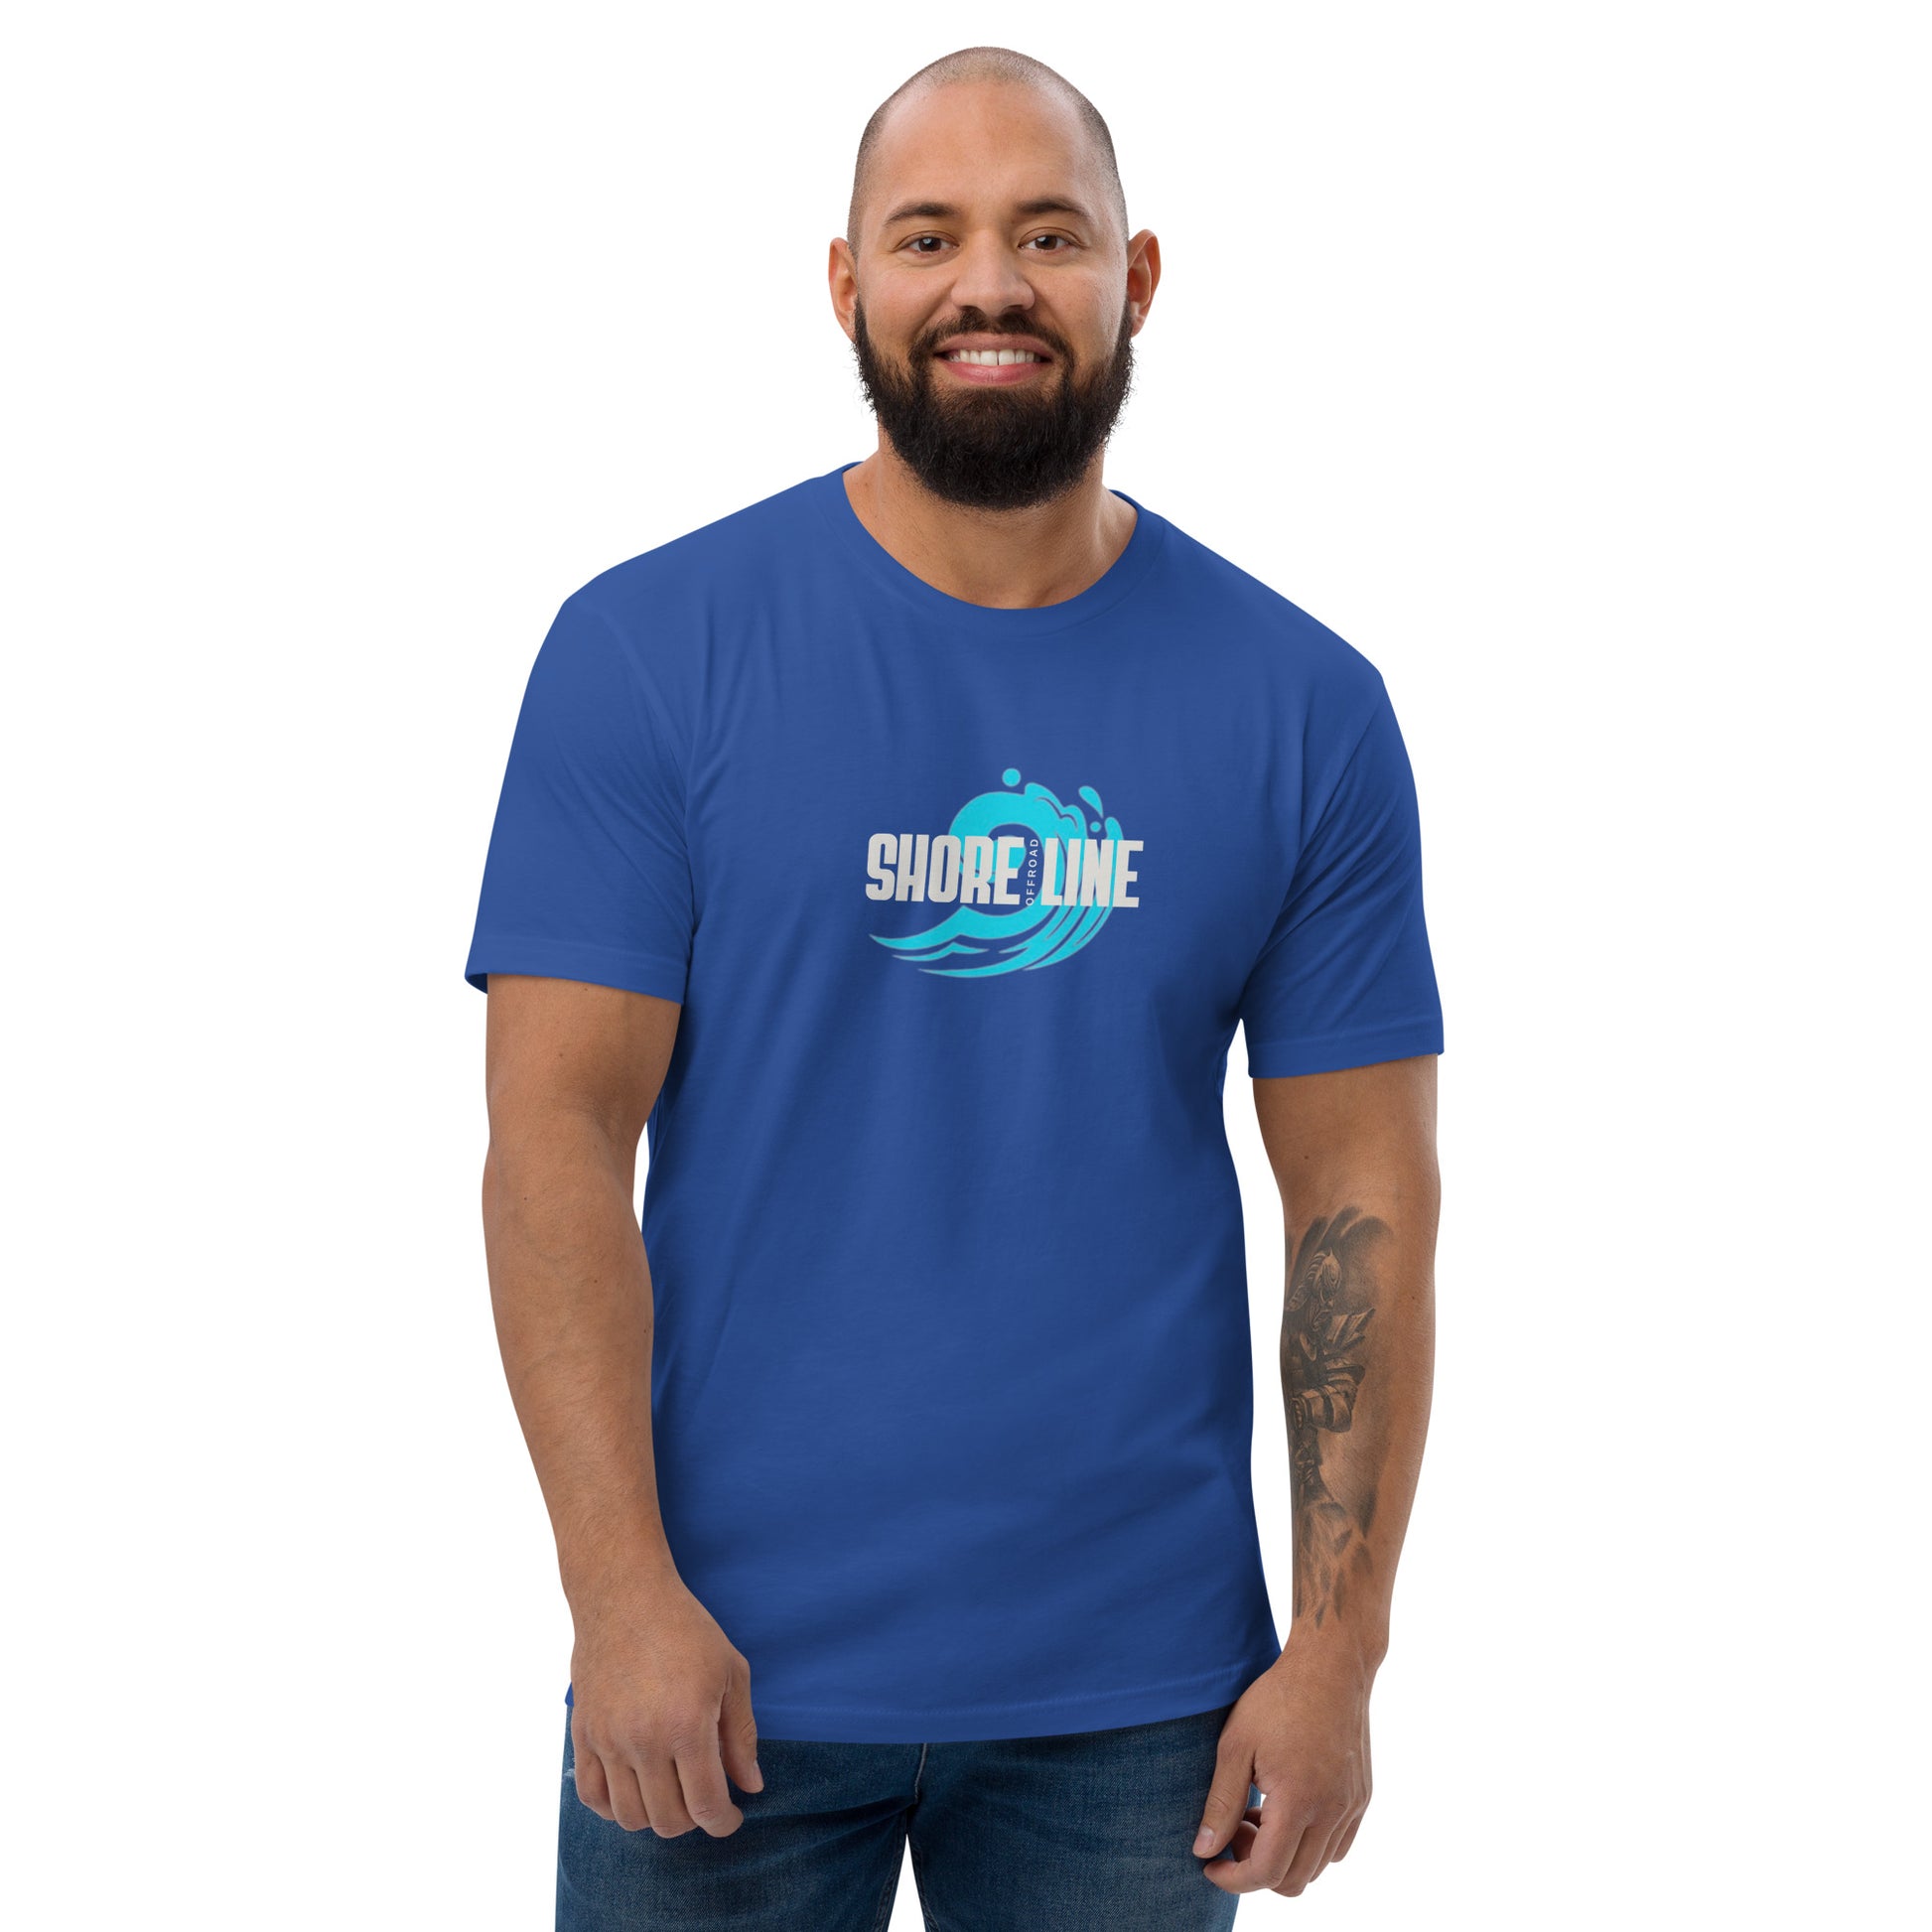 a man wearing a blue shirt that says shore line